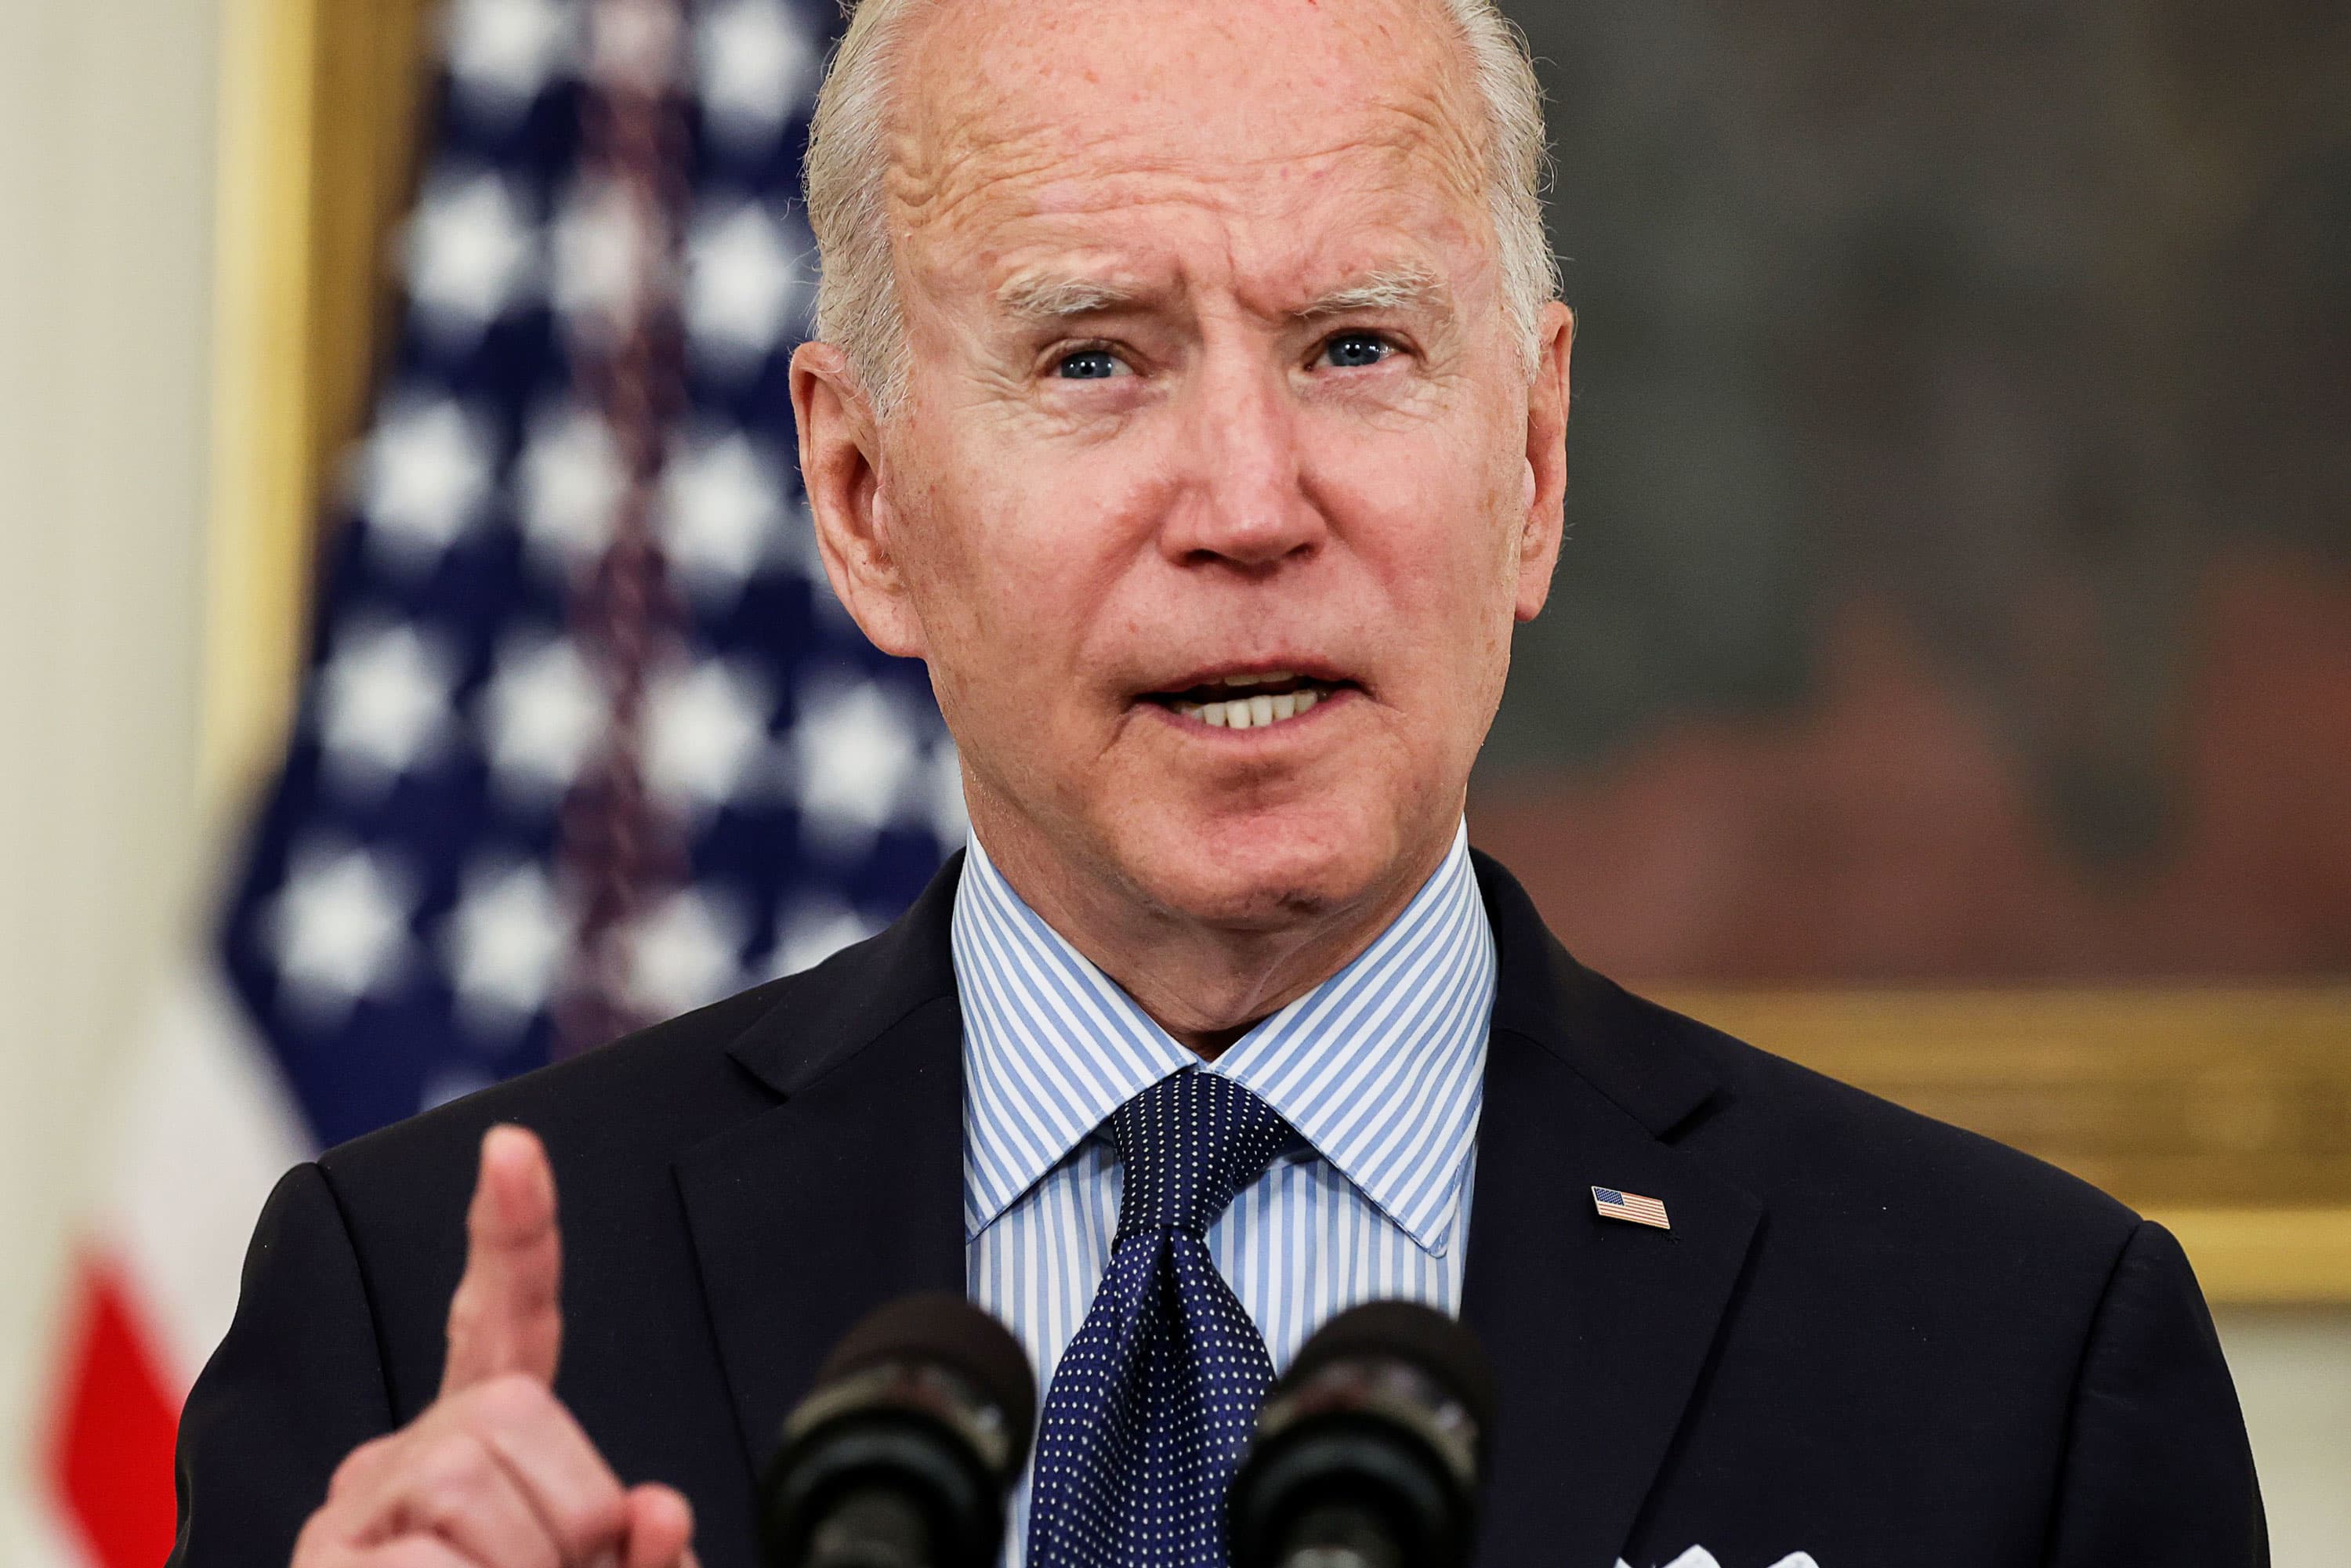 Biden outlines plan to expand U.S. health programs as part of broad domestic spending bill